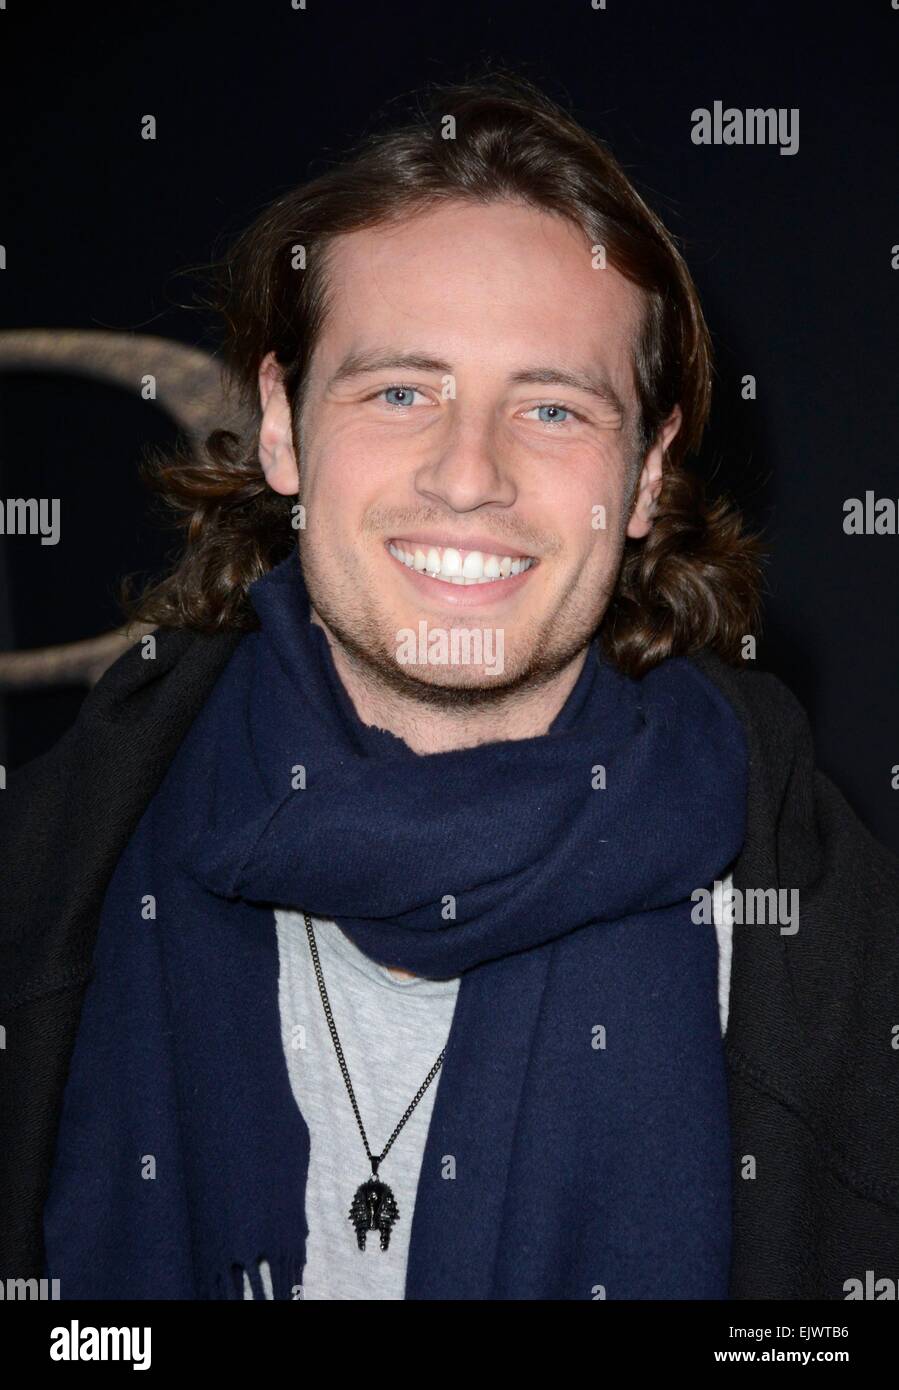 New York, NY, USA. 1st Apr, 2015. Mix Diskerud at arrivals for OUTLANDER Mid-Season Premiere, Ziegfeld Theatre, New York, NY April 1, 2015. Credit:  Derek Storm/Everett Collection/Alamy Live News Stock Photo